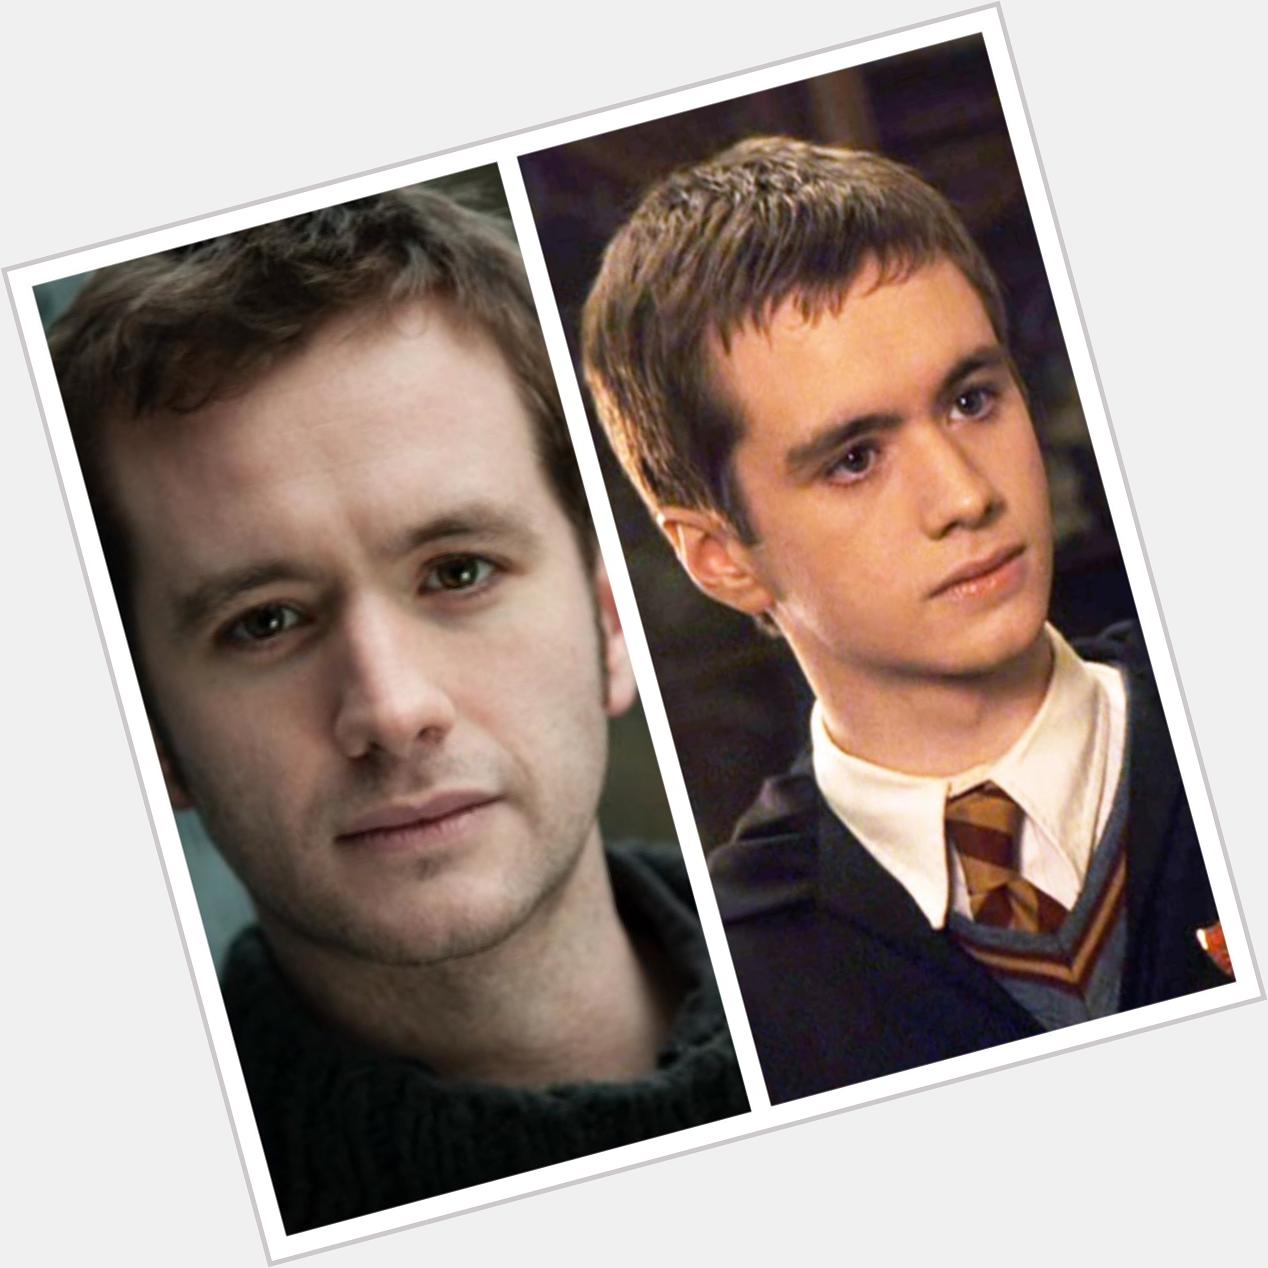 \" March 15: Happy Birthday, Sean Biggerstaff He played Oliver Wood in the films. 